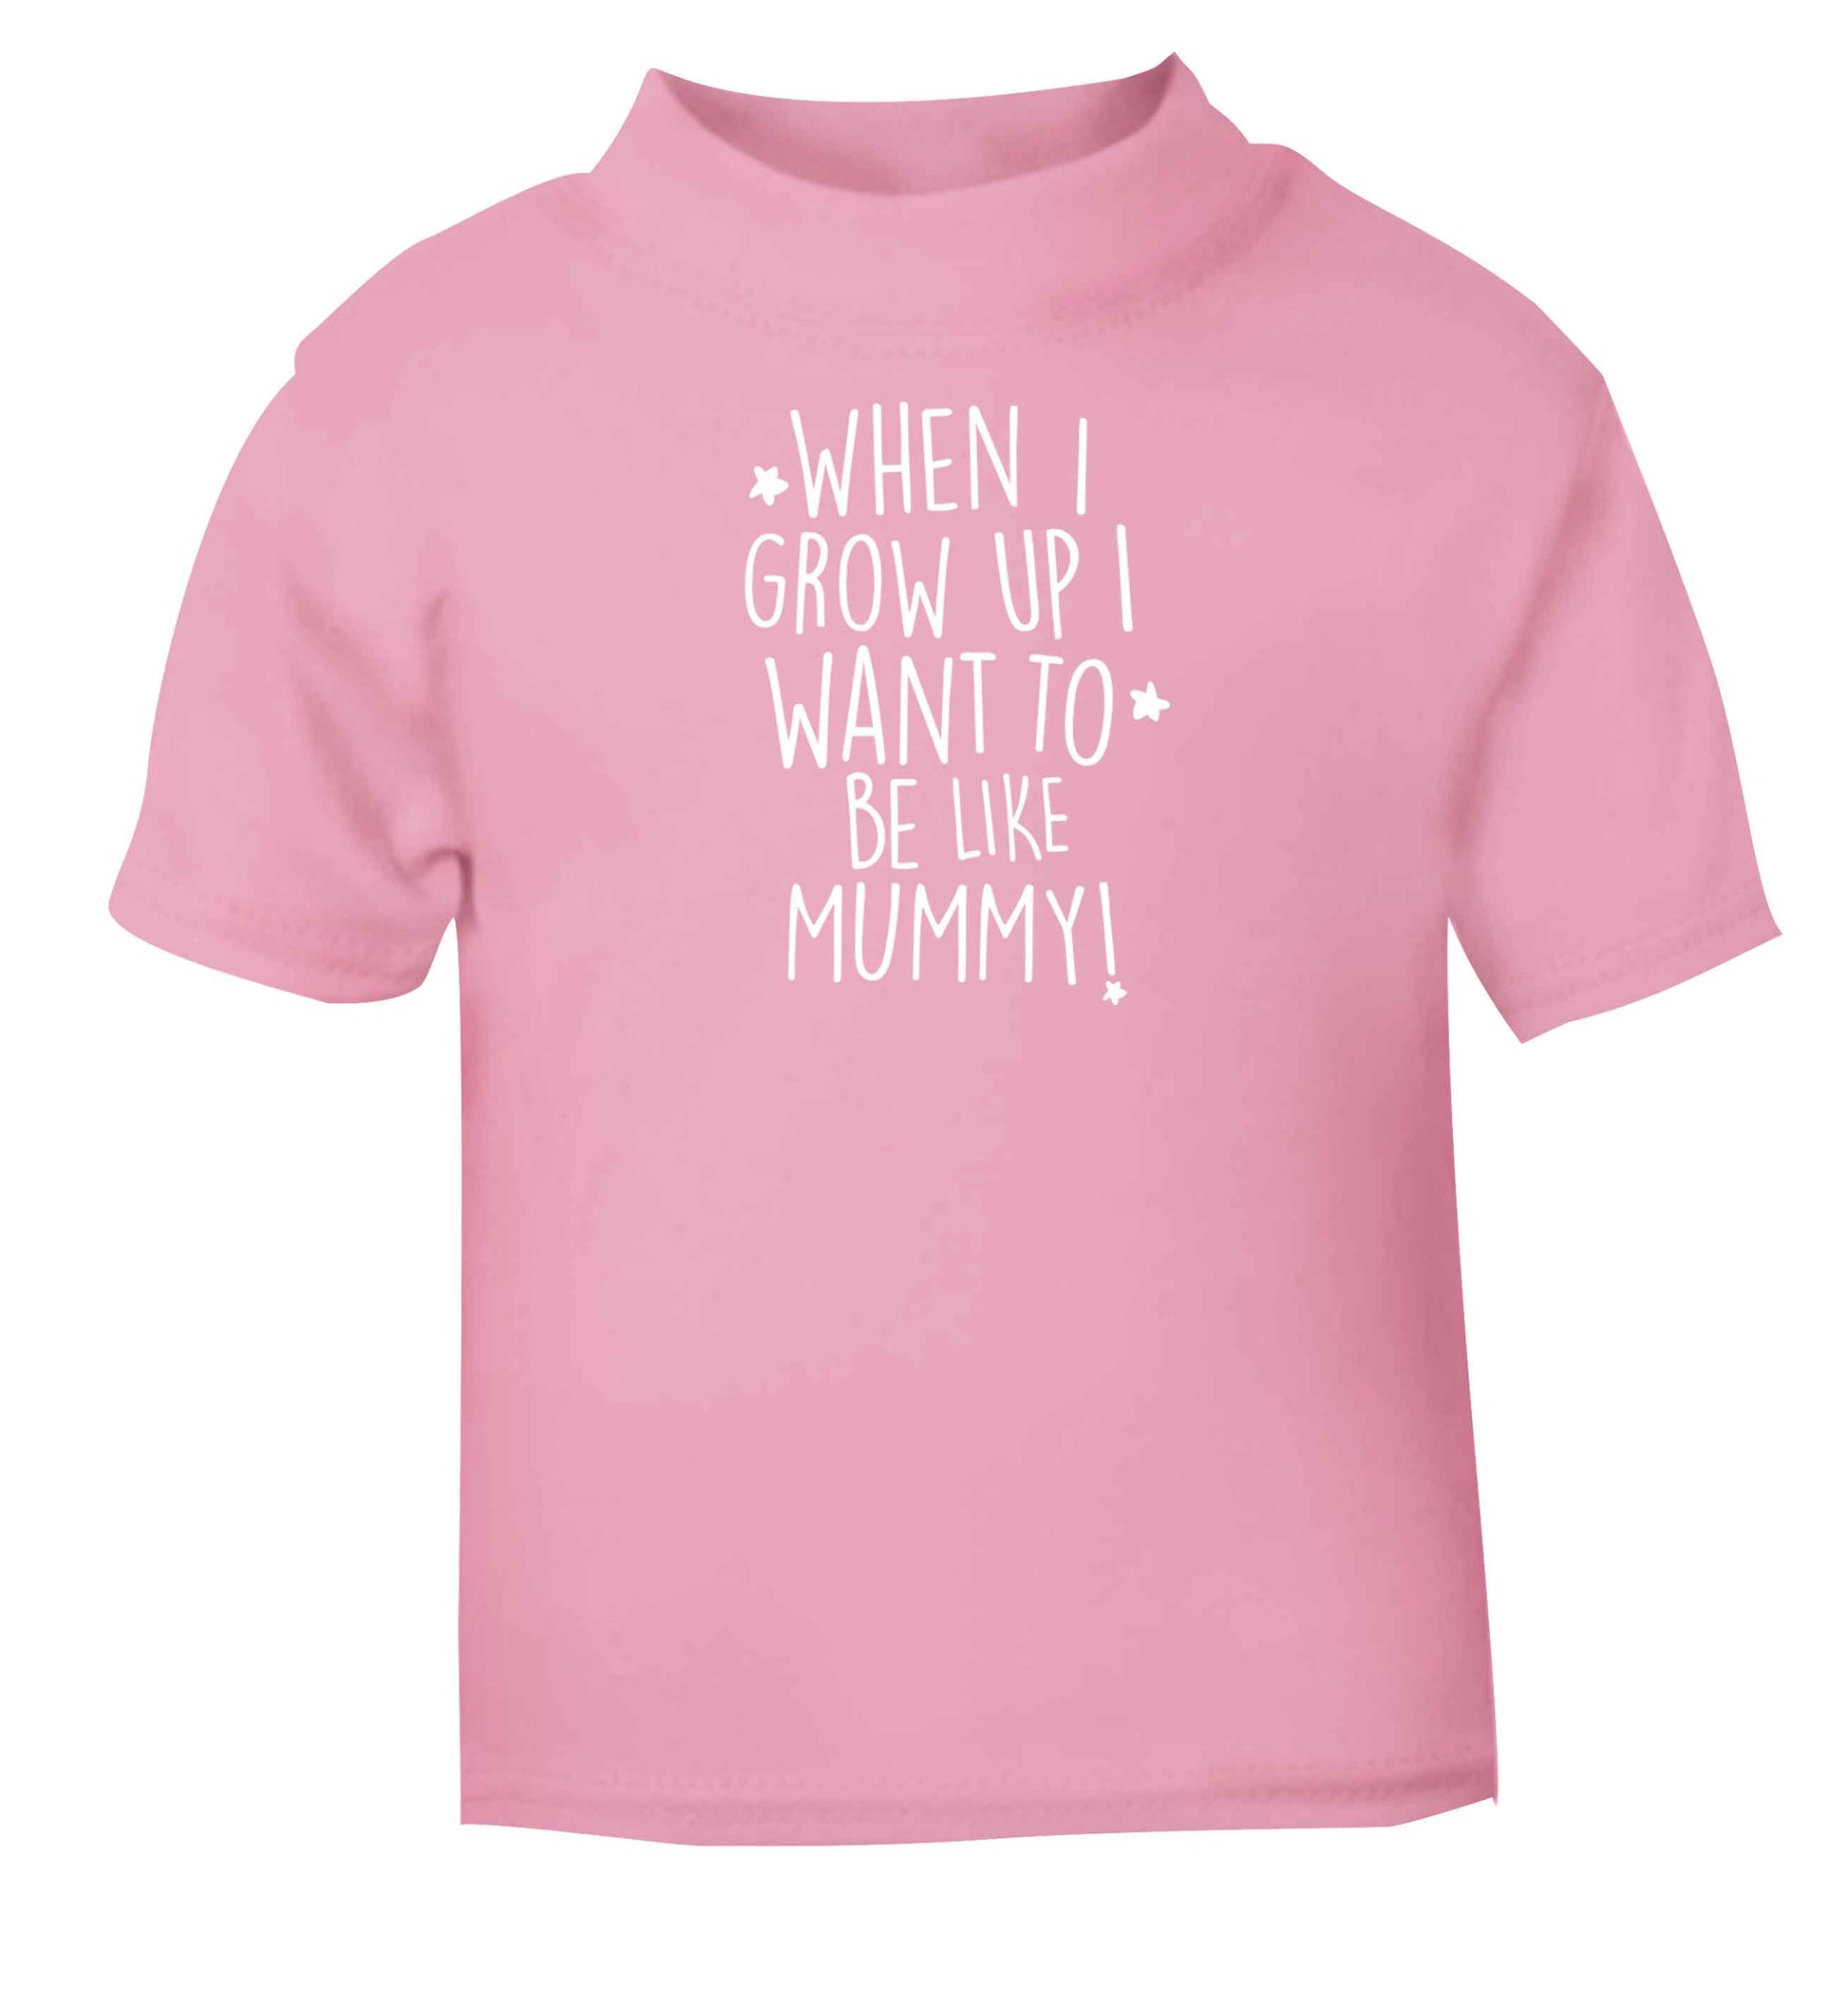 When I grow up I want to be like my mummy light pink baby toddler Tshirt 2 Years